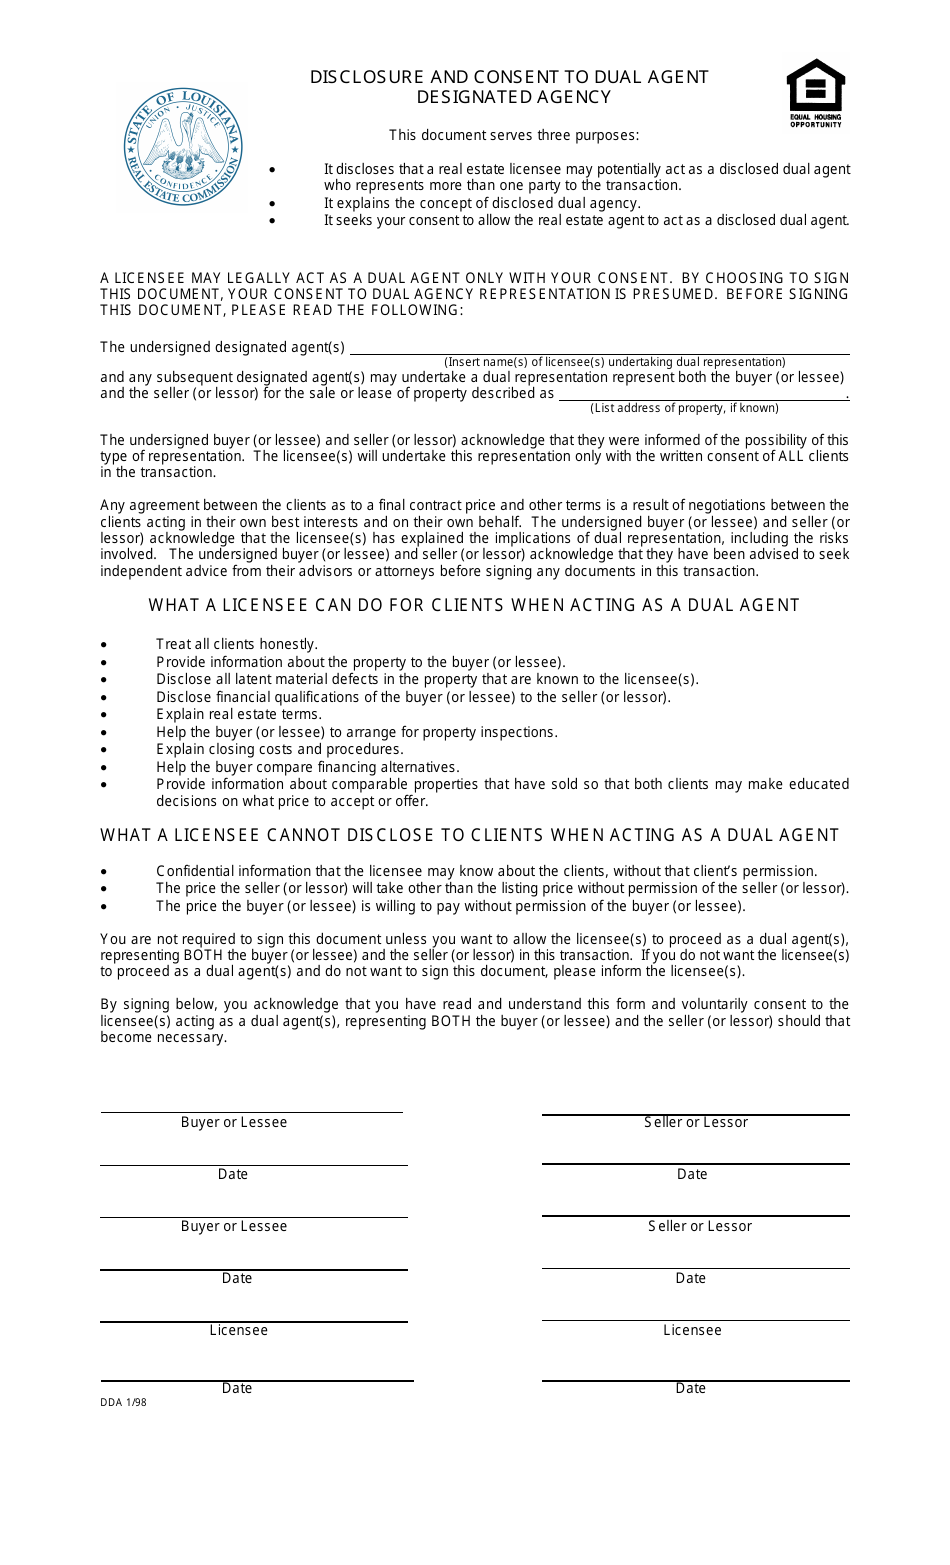 Disclosure and Consent to Dual Agent Designated Agency - Louisiana, Page 1